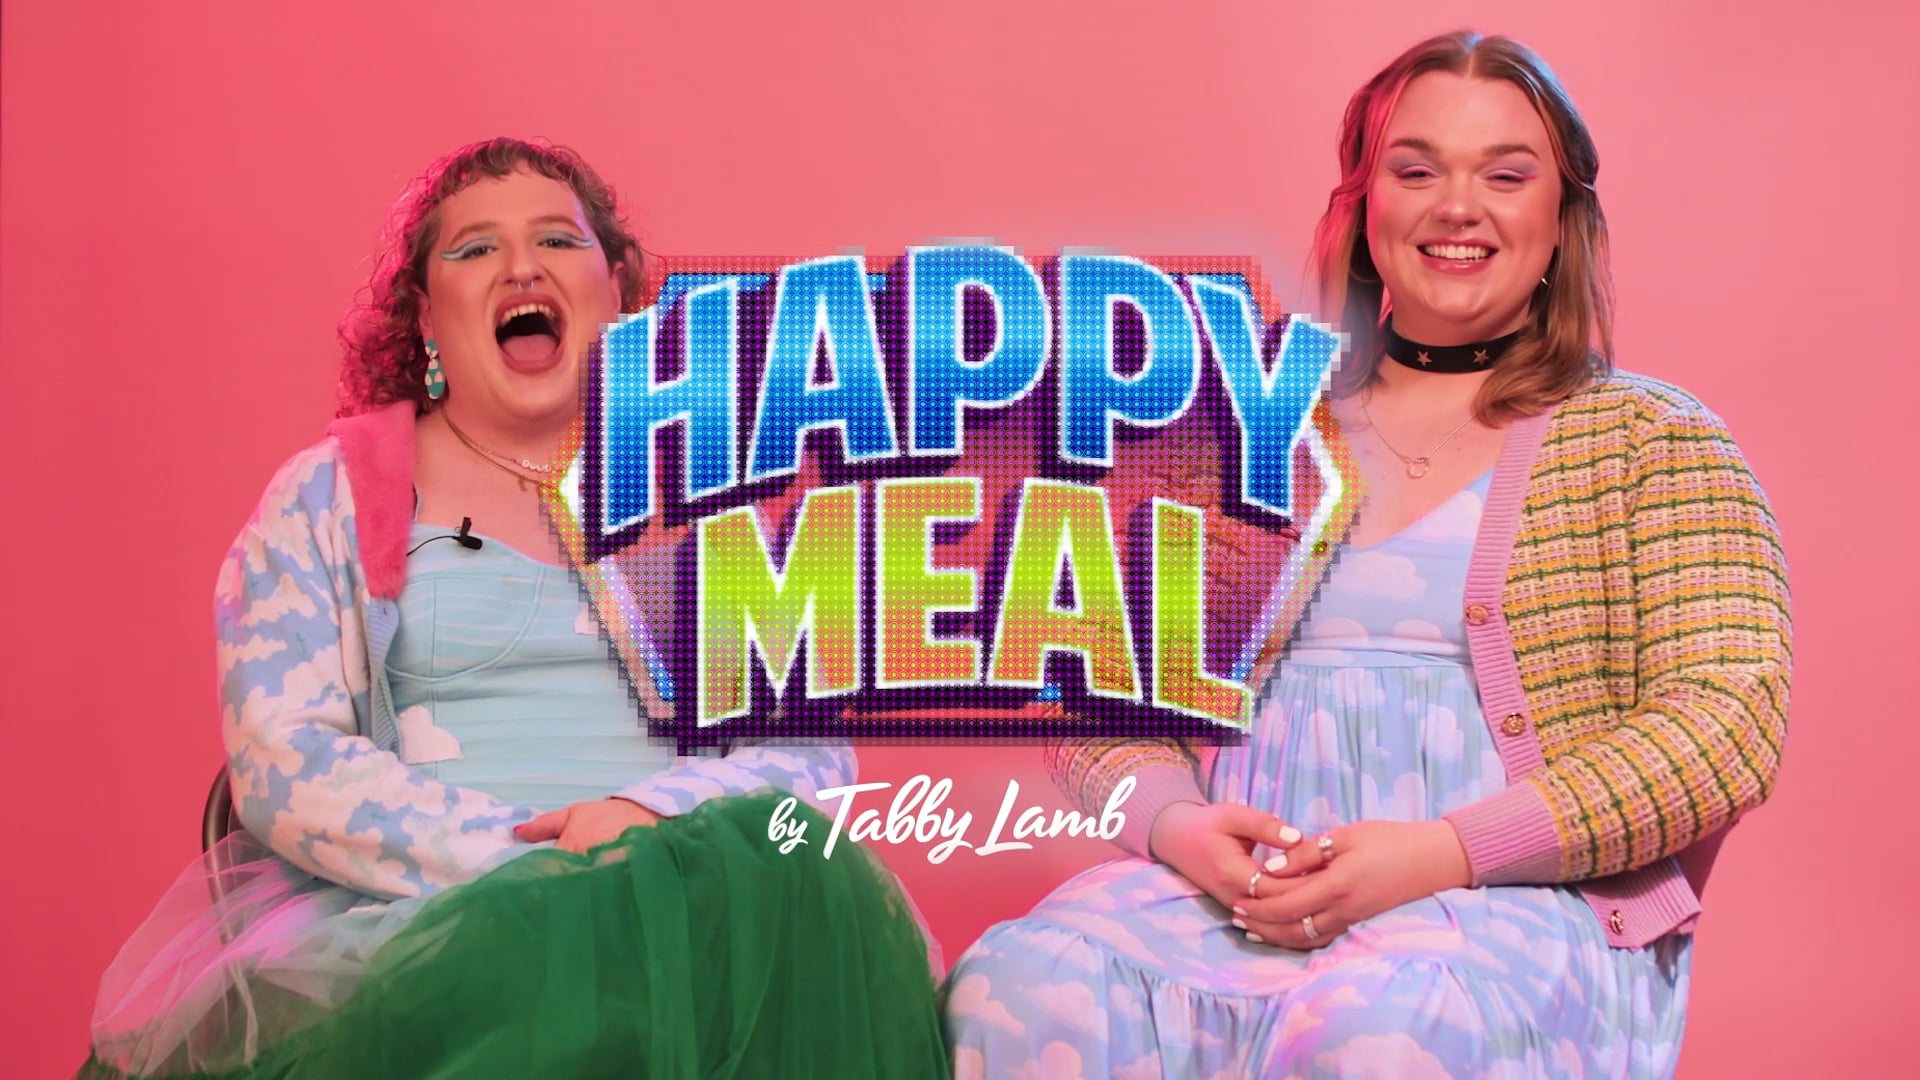 Happy Meal - Meet Tabby and Allie